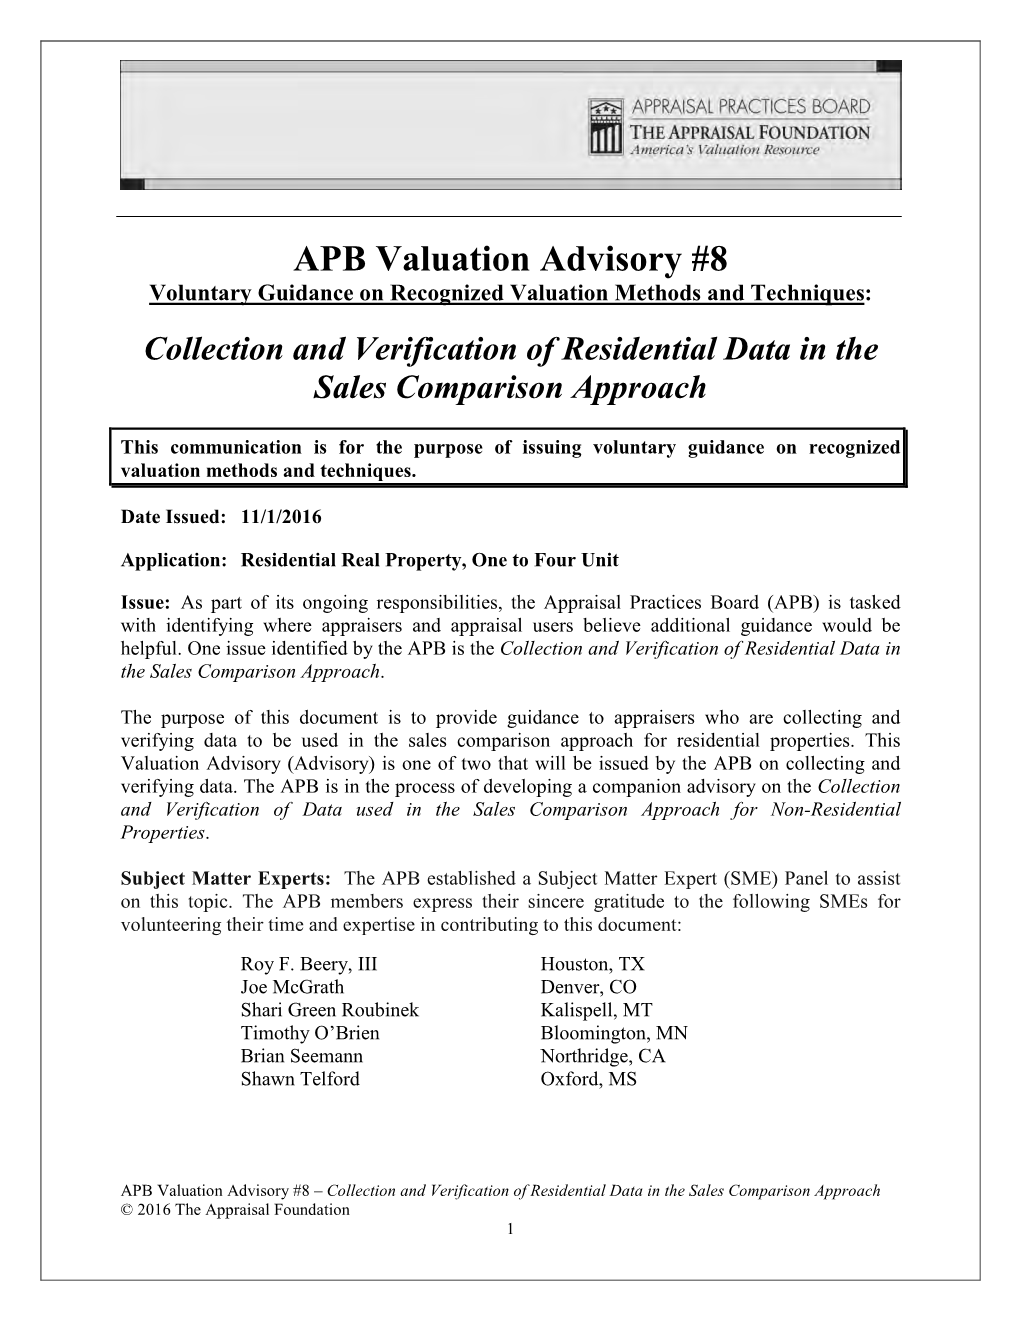 APB Valuation Advisory #8 Voluntary Guidance on Recognized Valuation Methods and Techniques